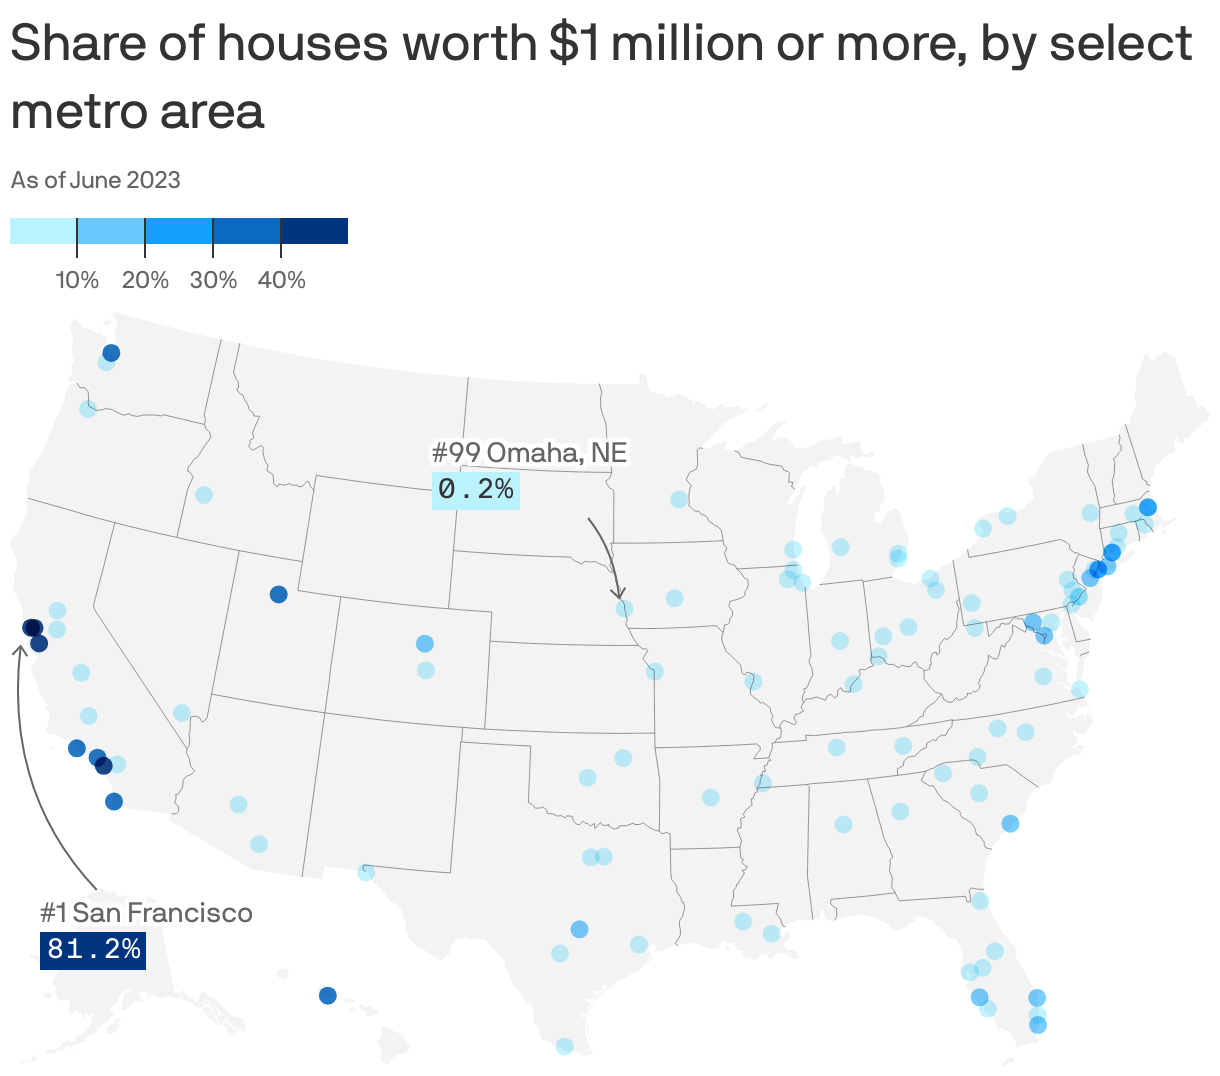 Share of houses worth $1 million or more, by select metro area